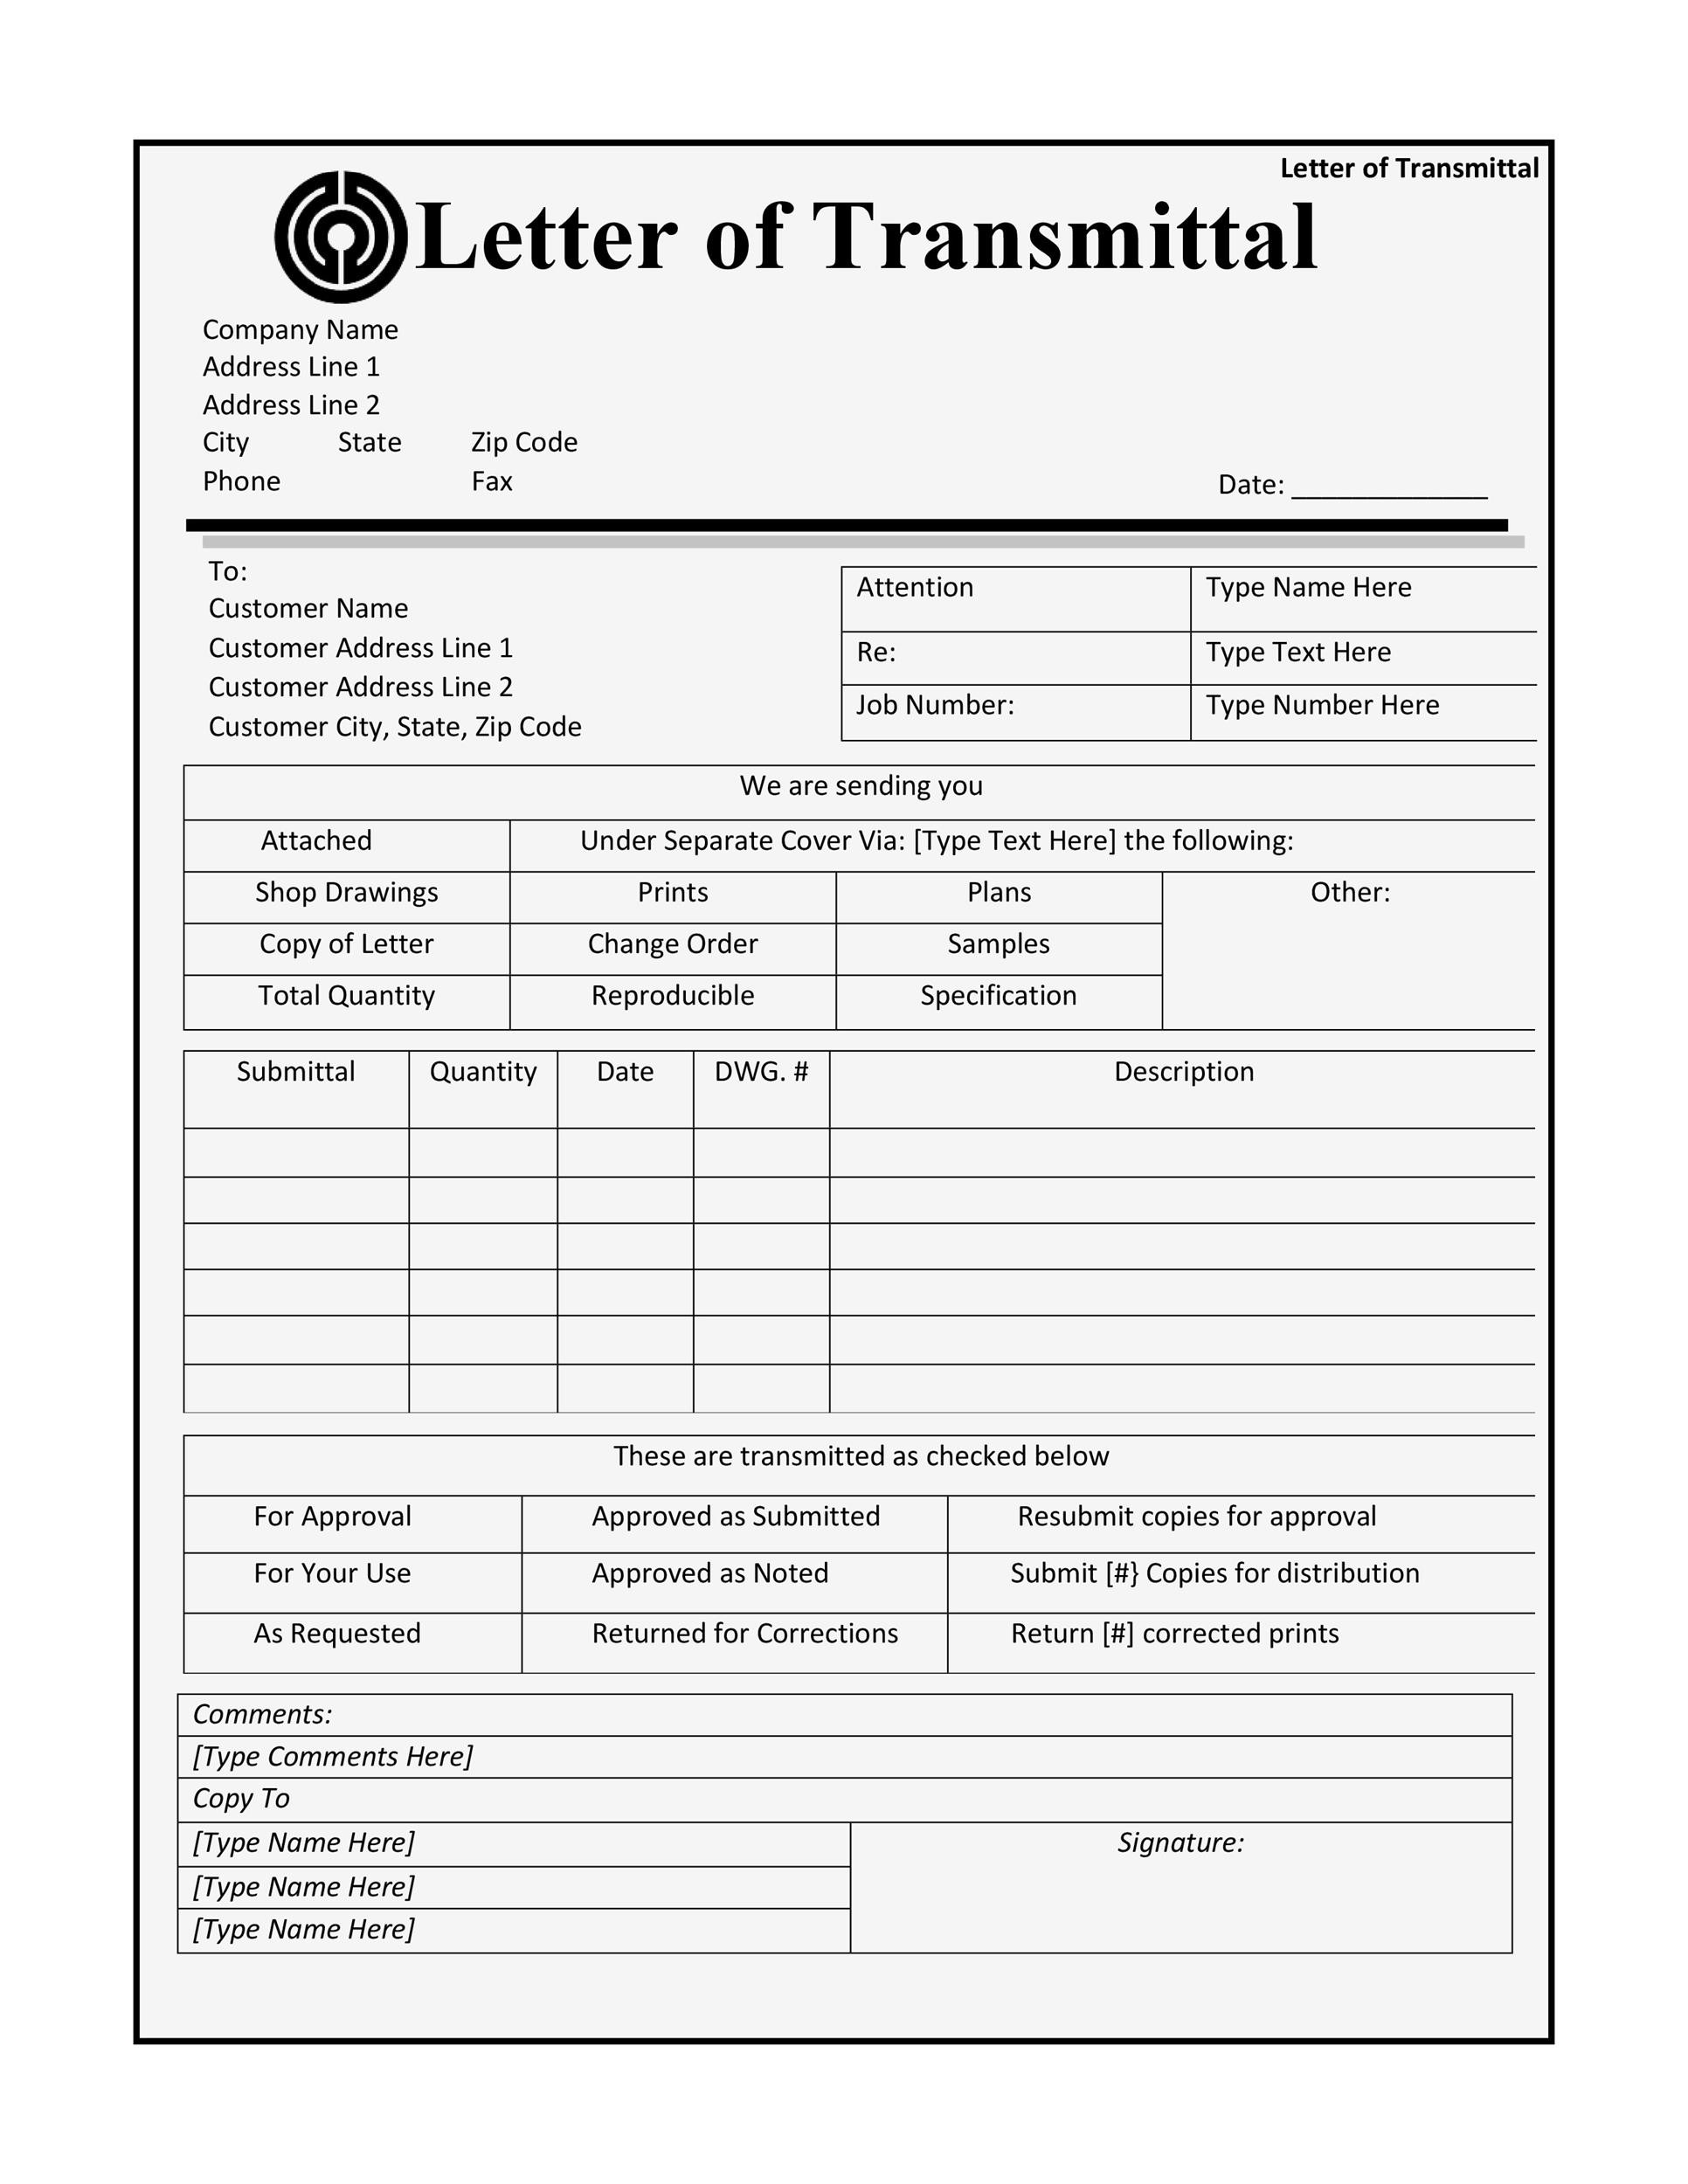 Letter Of Transmittal Template Free Download - Printable Templates Free